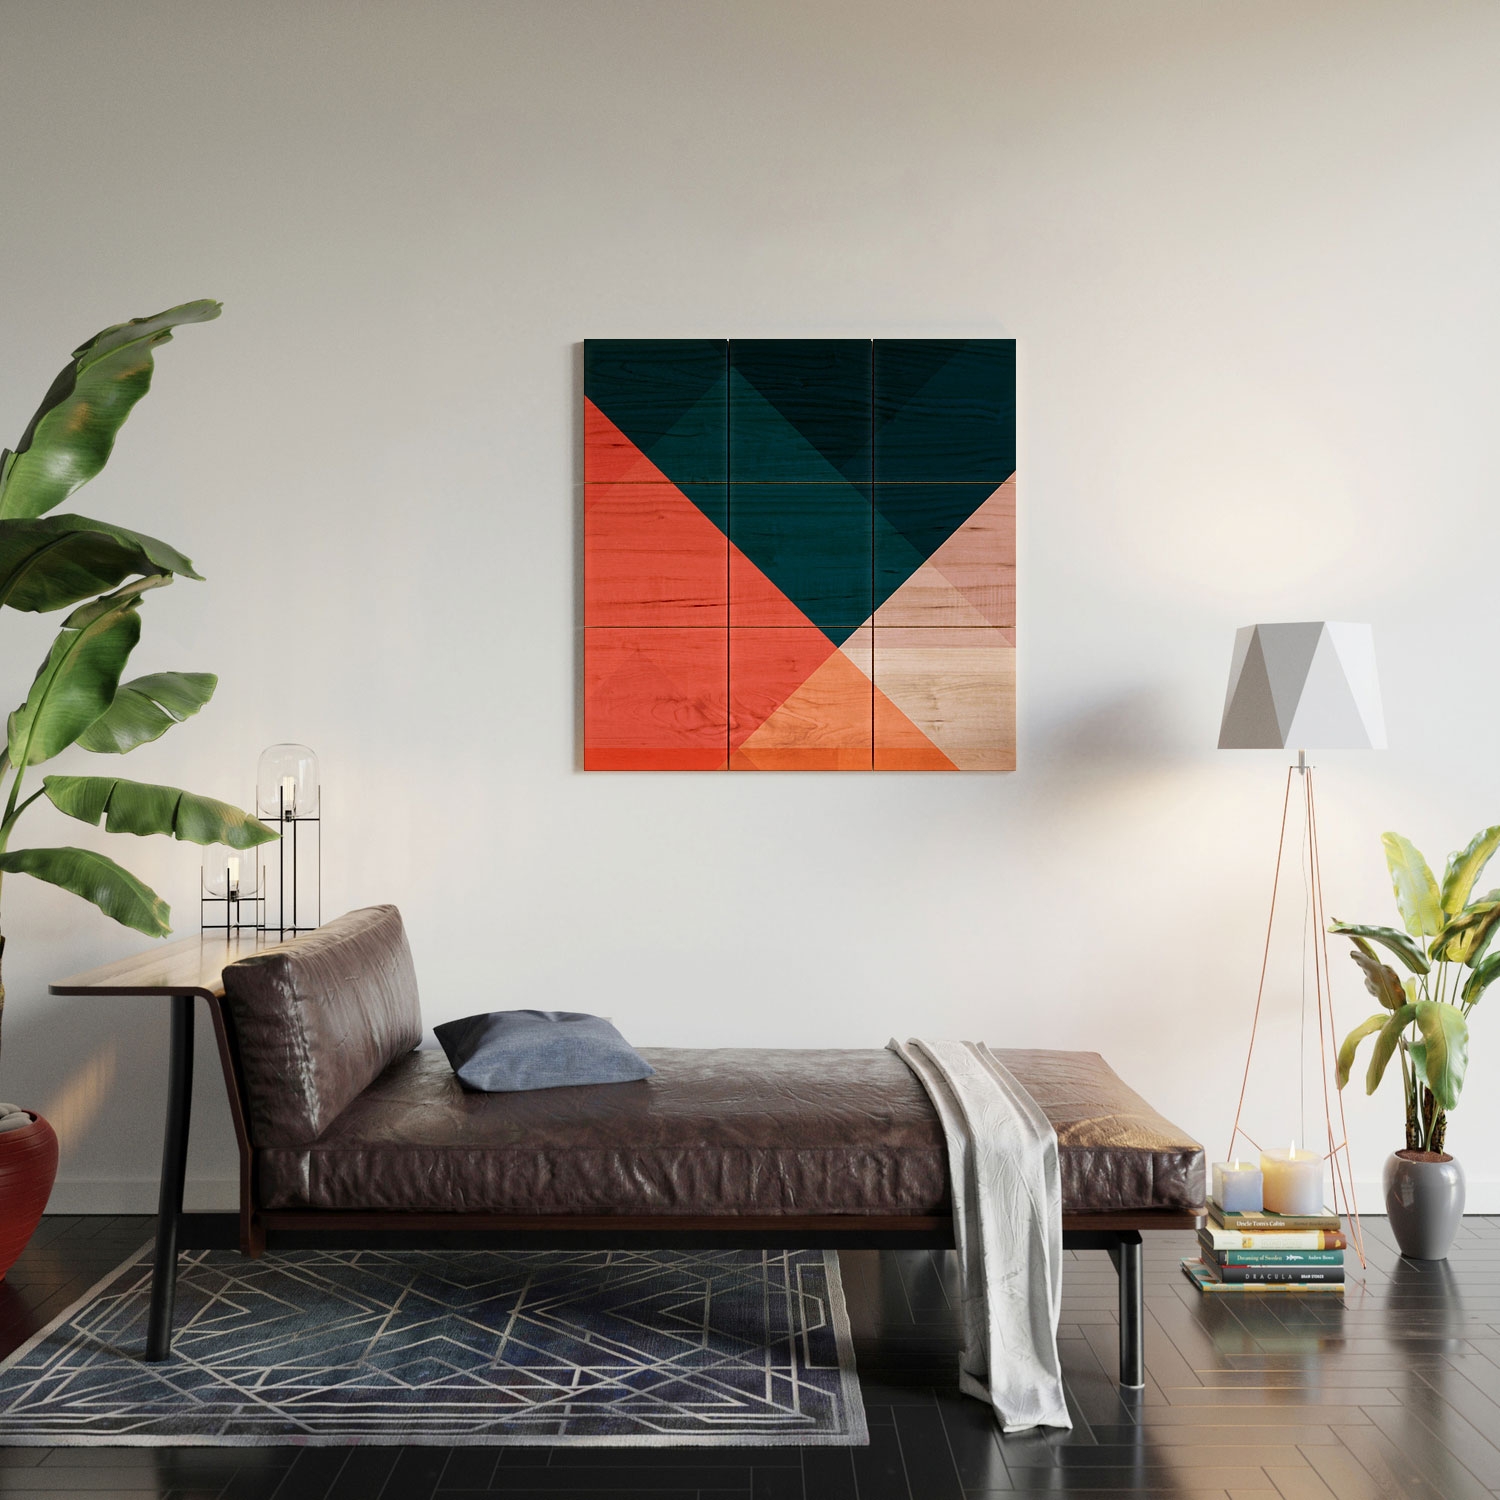 Geometric 1708 by The Old Art Studio - Wood Wall Mural5' x 5' (Nine 20" wood Squares) - Image 2